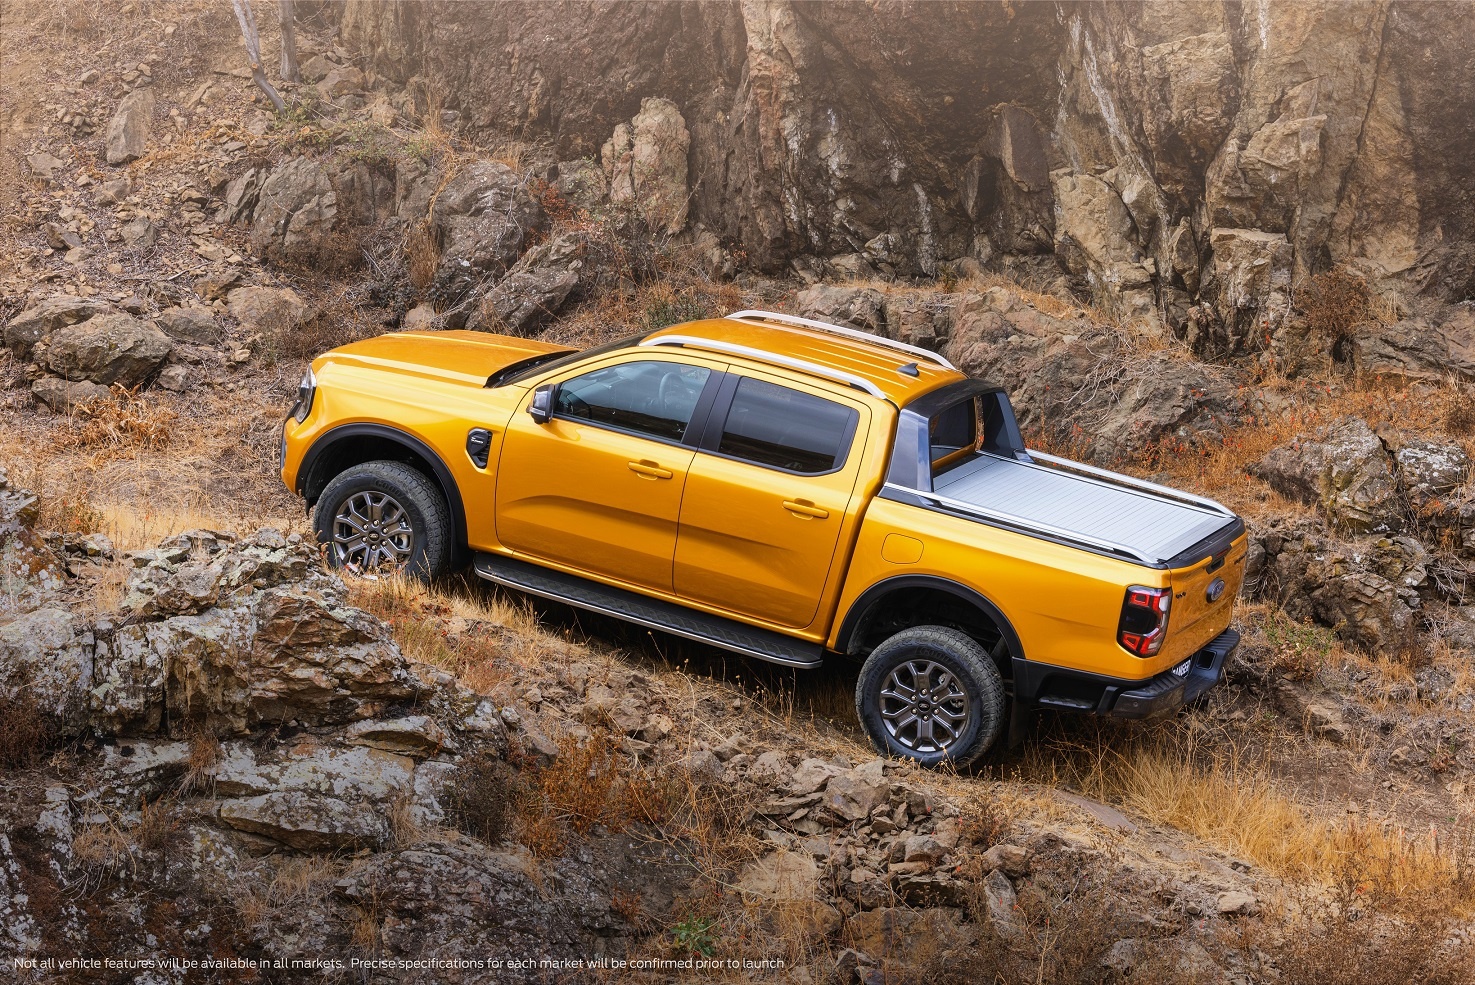 Next-Generation Ford Ranger Delivers High-Tech Features